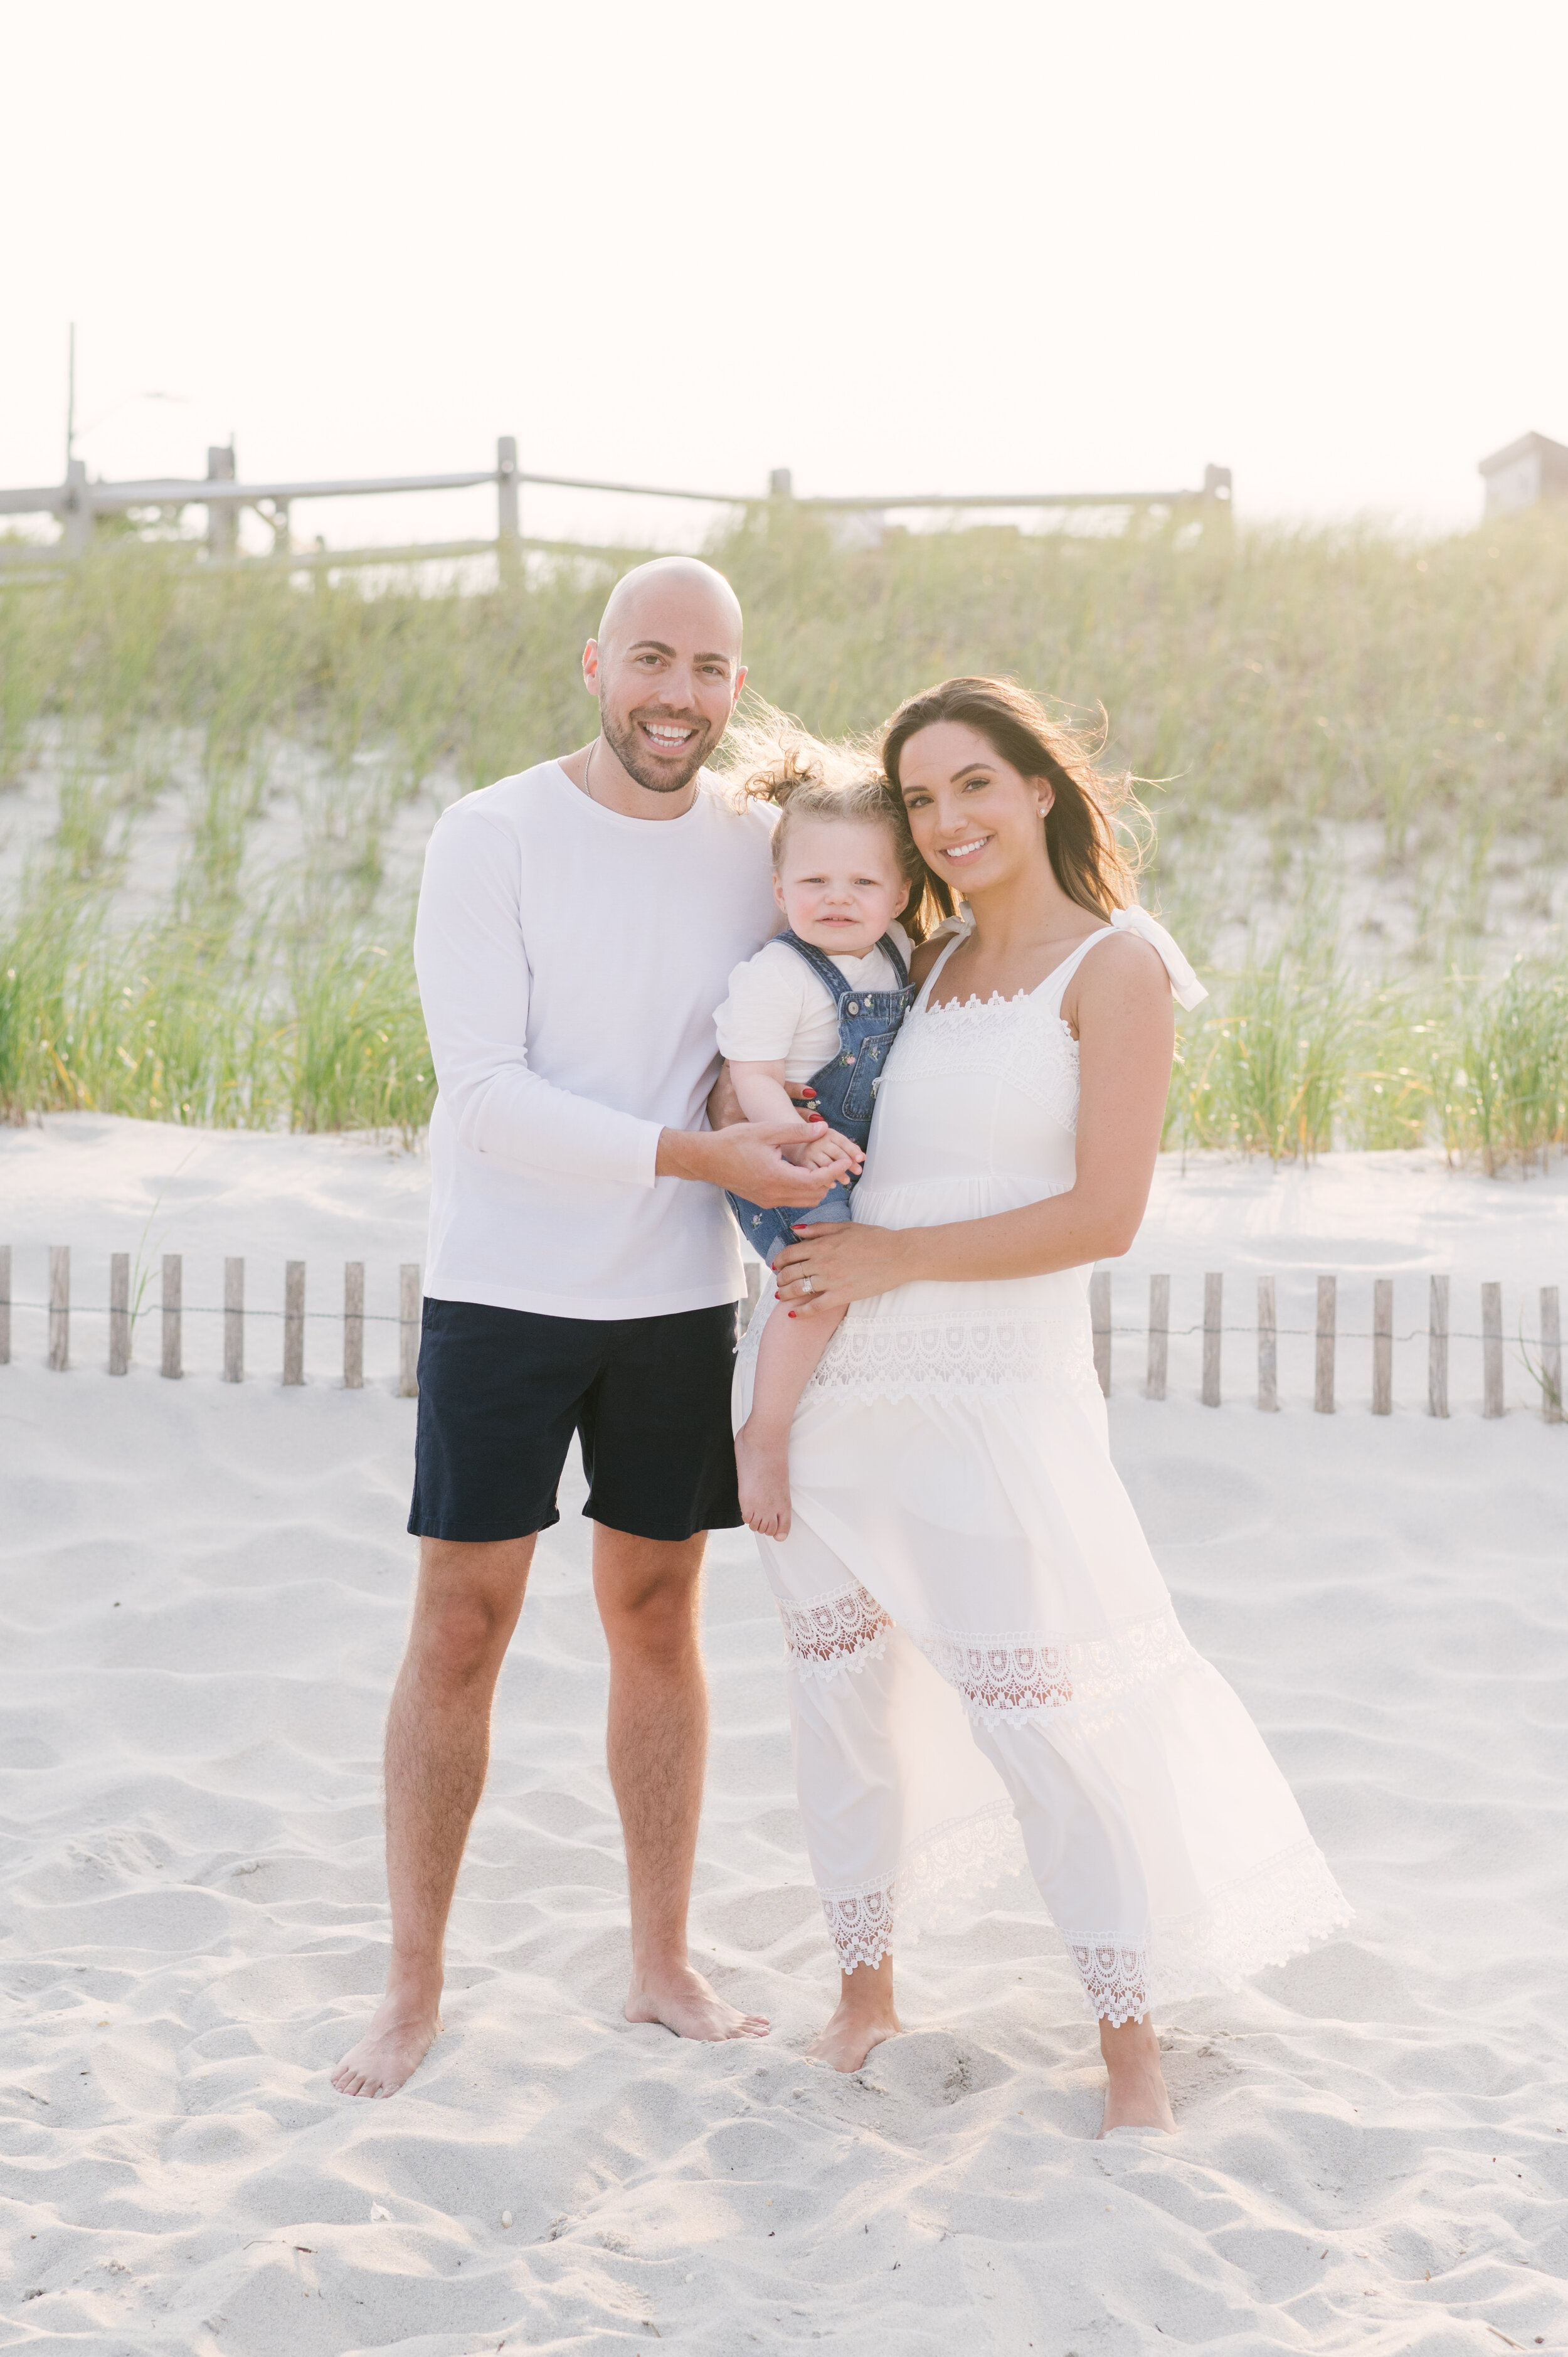 Mom, dad, and daughter in denim and white during beach photos  | NKB Photo